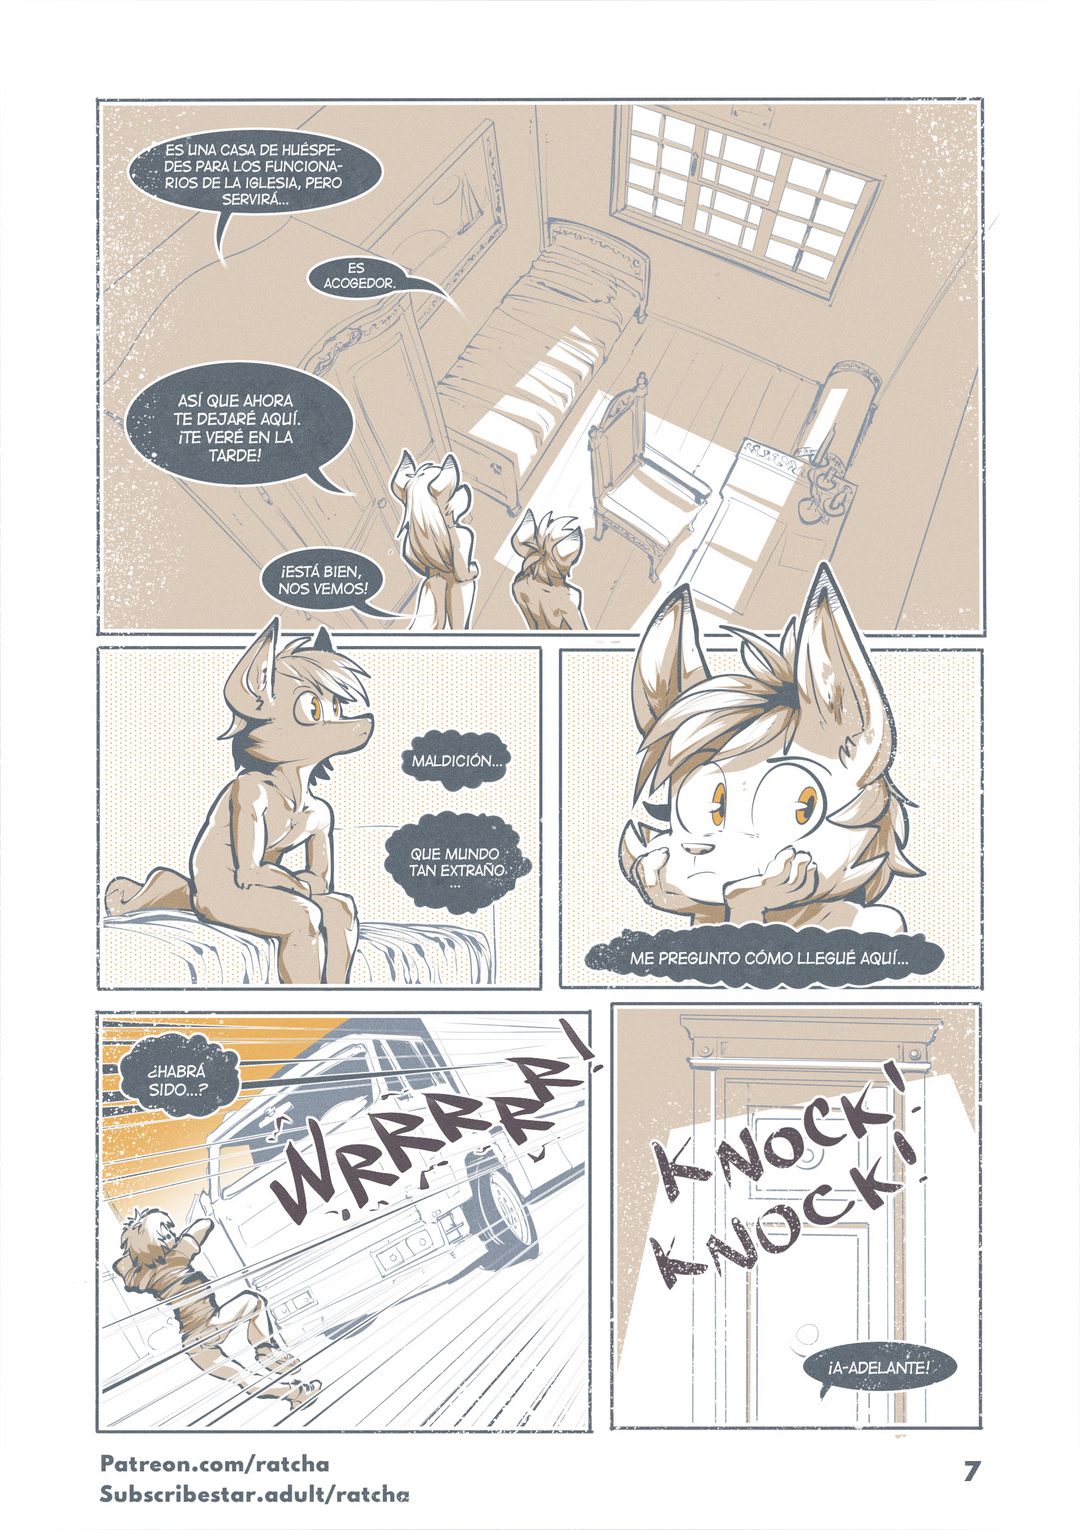 Reincarnated In Another World As A Furry Fox Ratcha Comic Porno 07